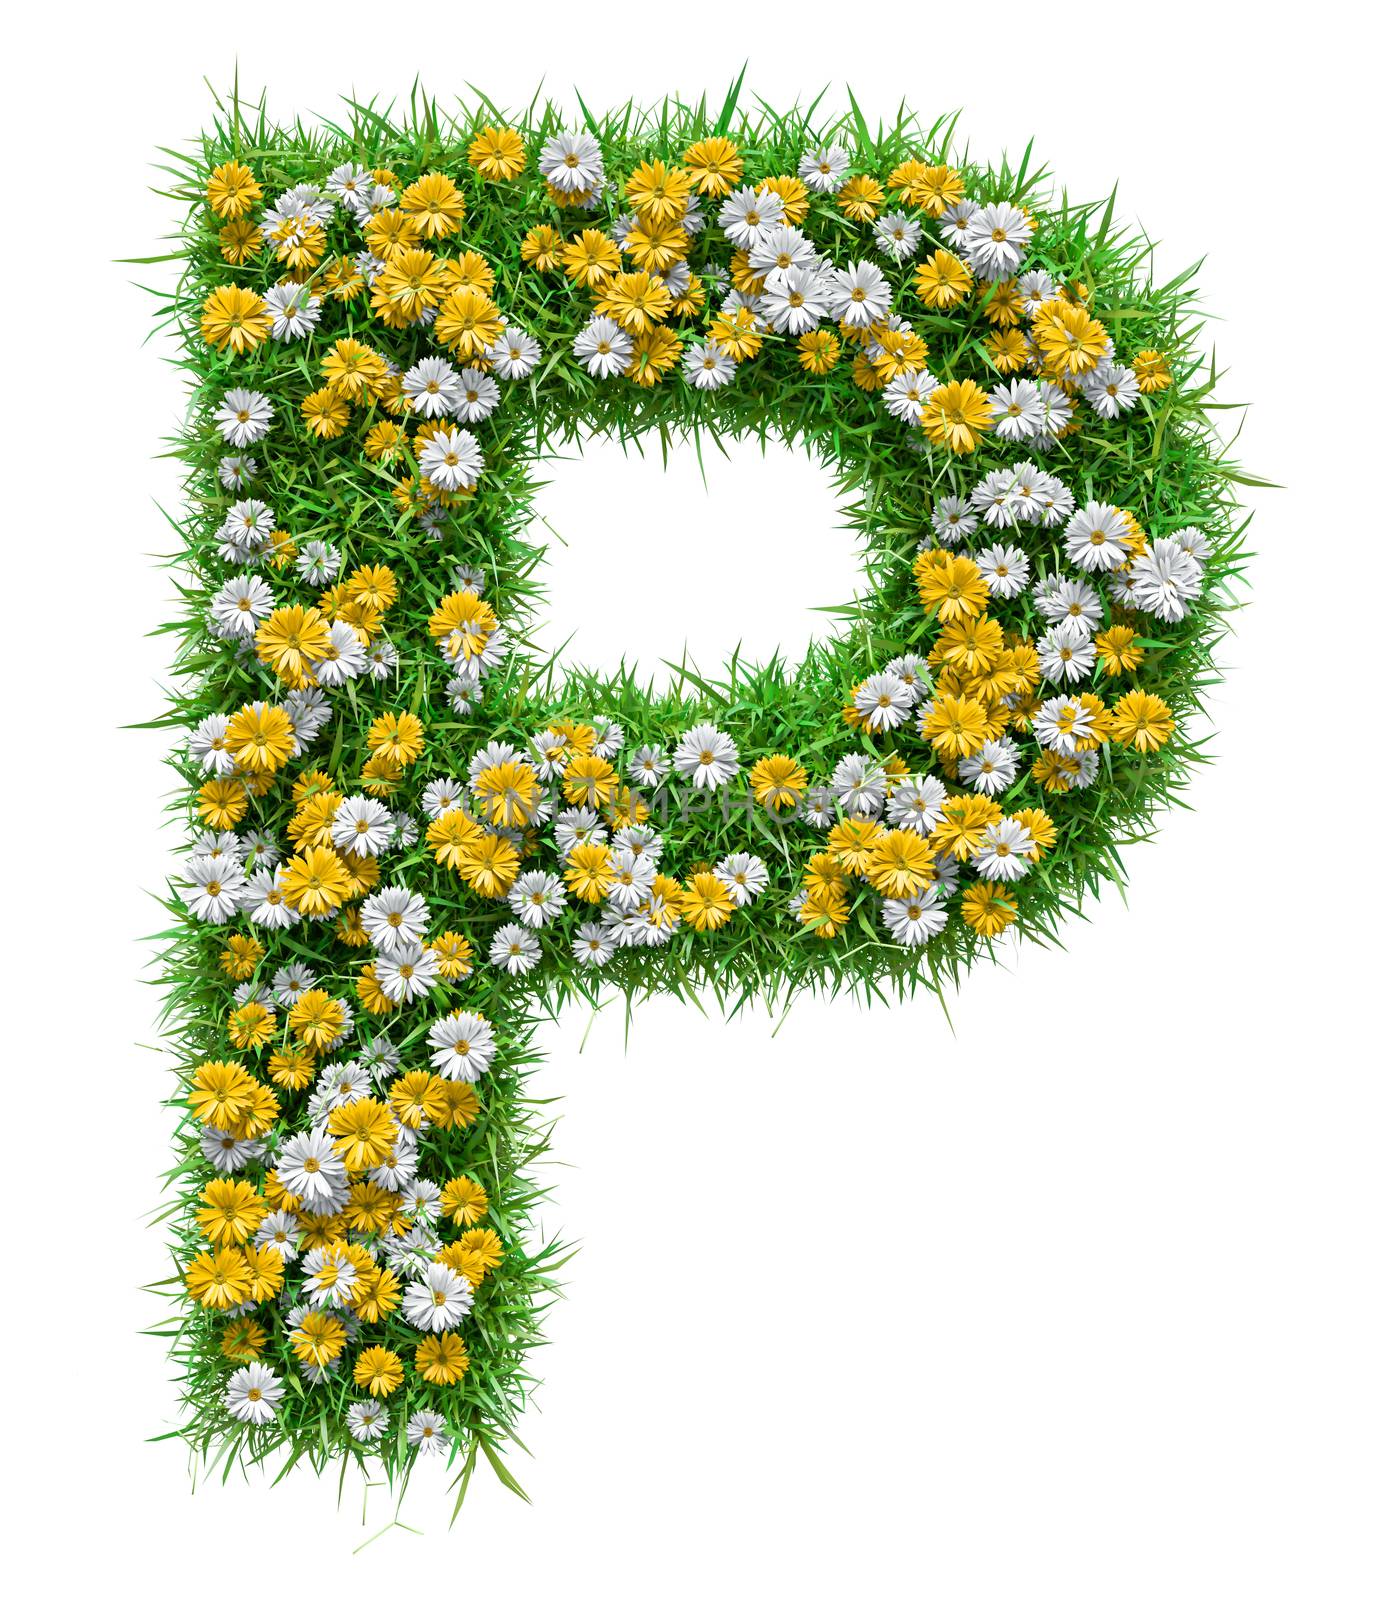 Letter P Of Green Grass And Flowers by cherezoff